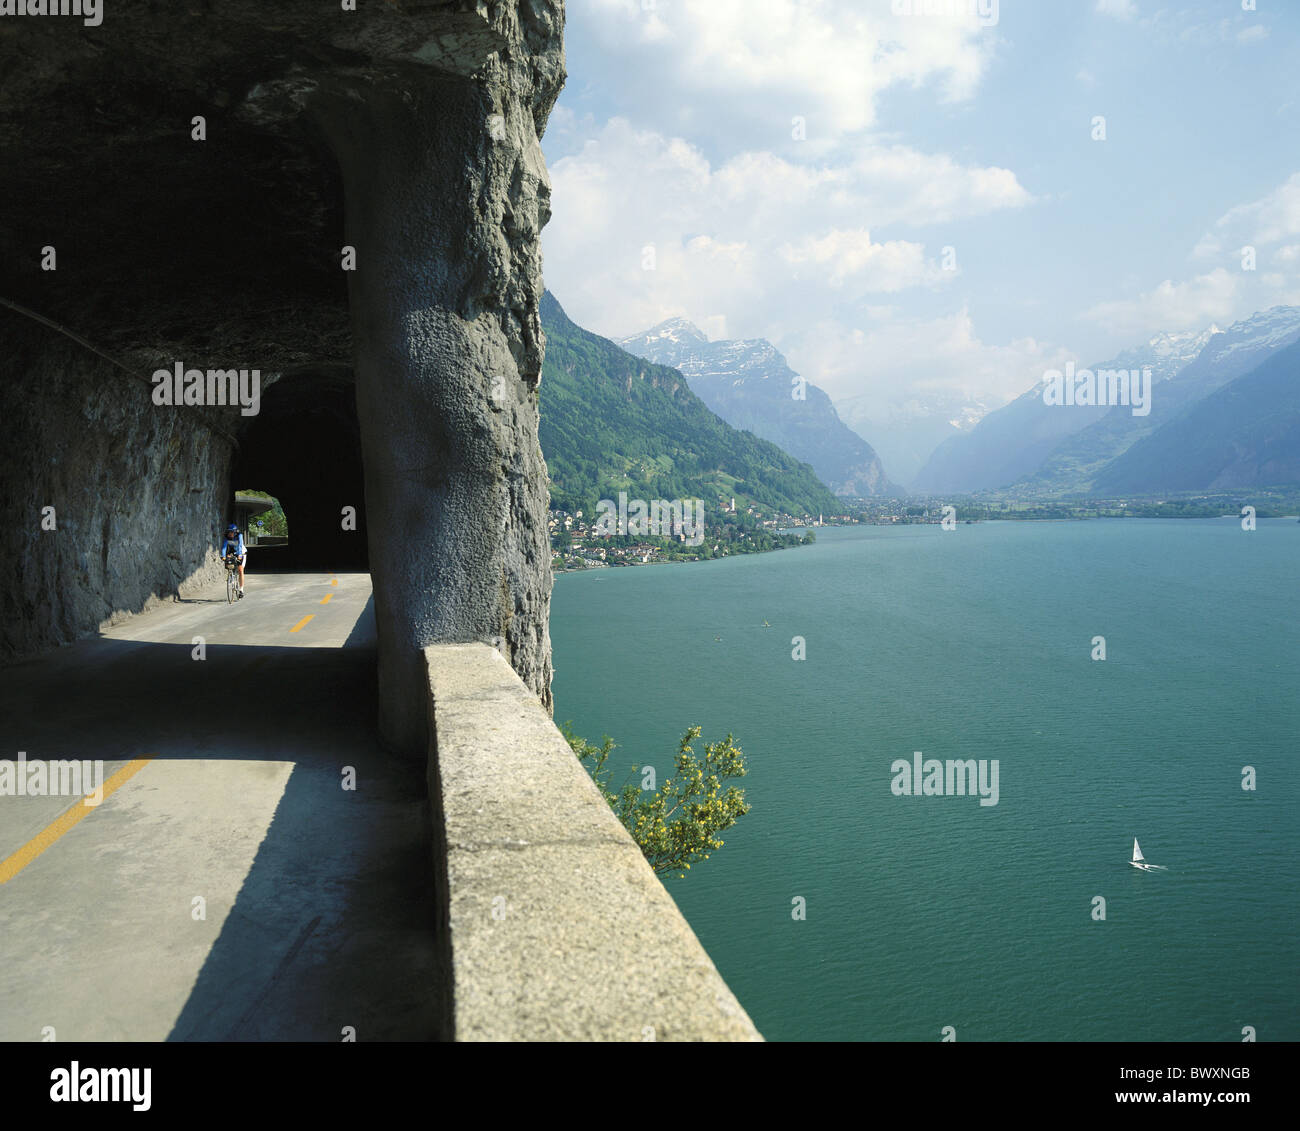 Axenstrasse paysage Suisse Europe rive tunnel Suisse Europe uri uri lac mer lac biker Suisse Banque D'Images